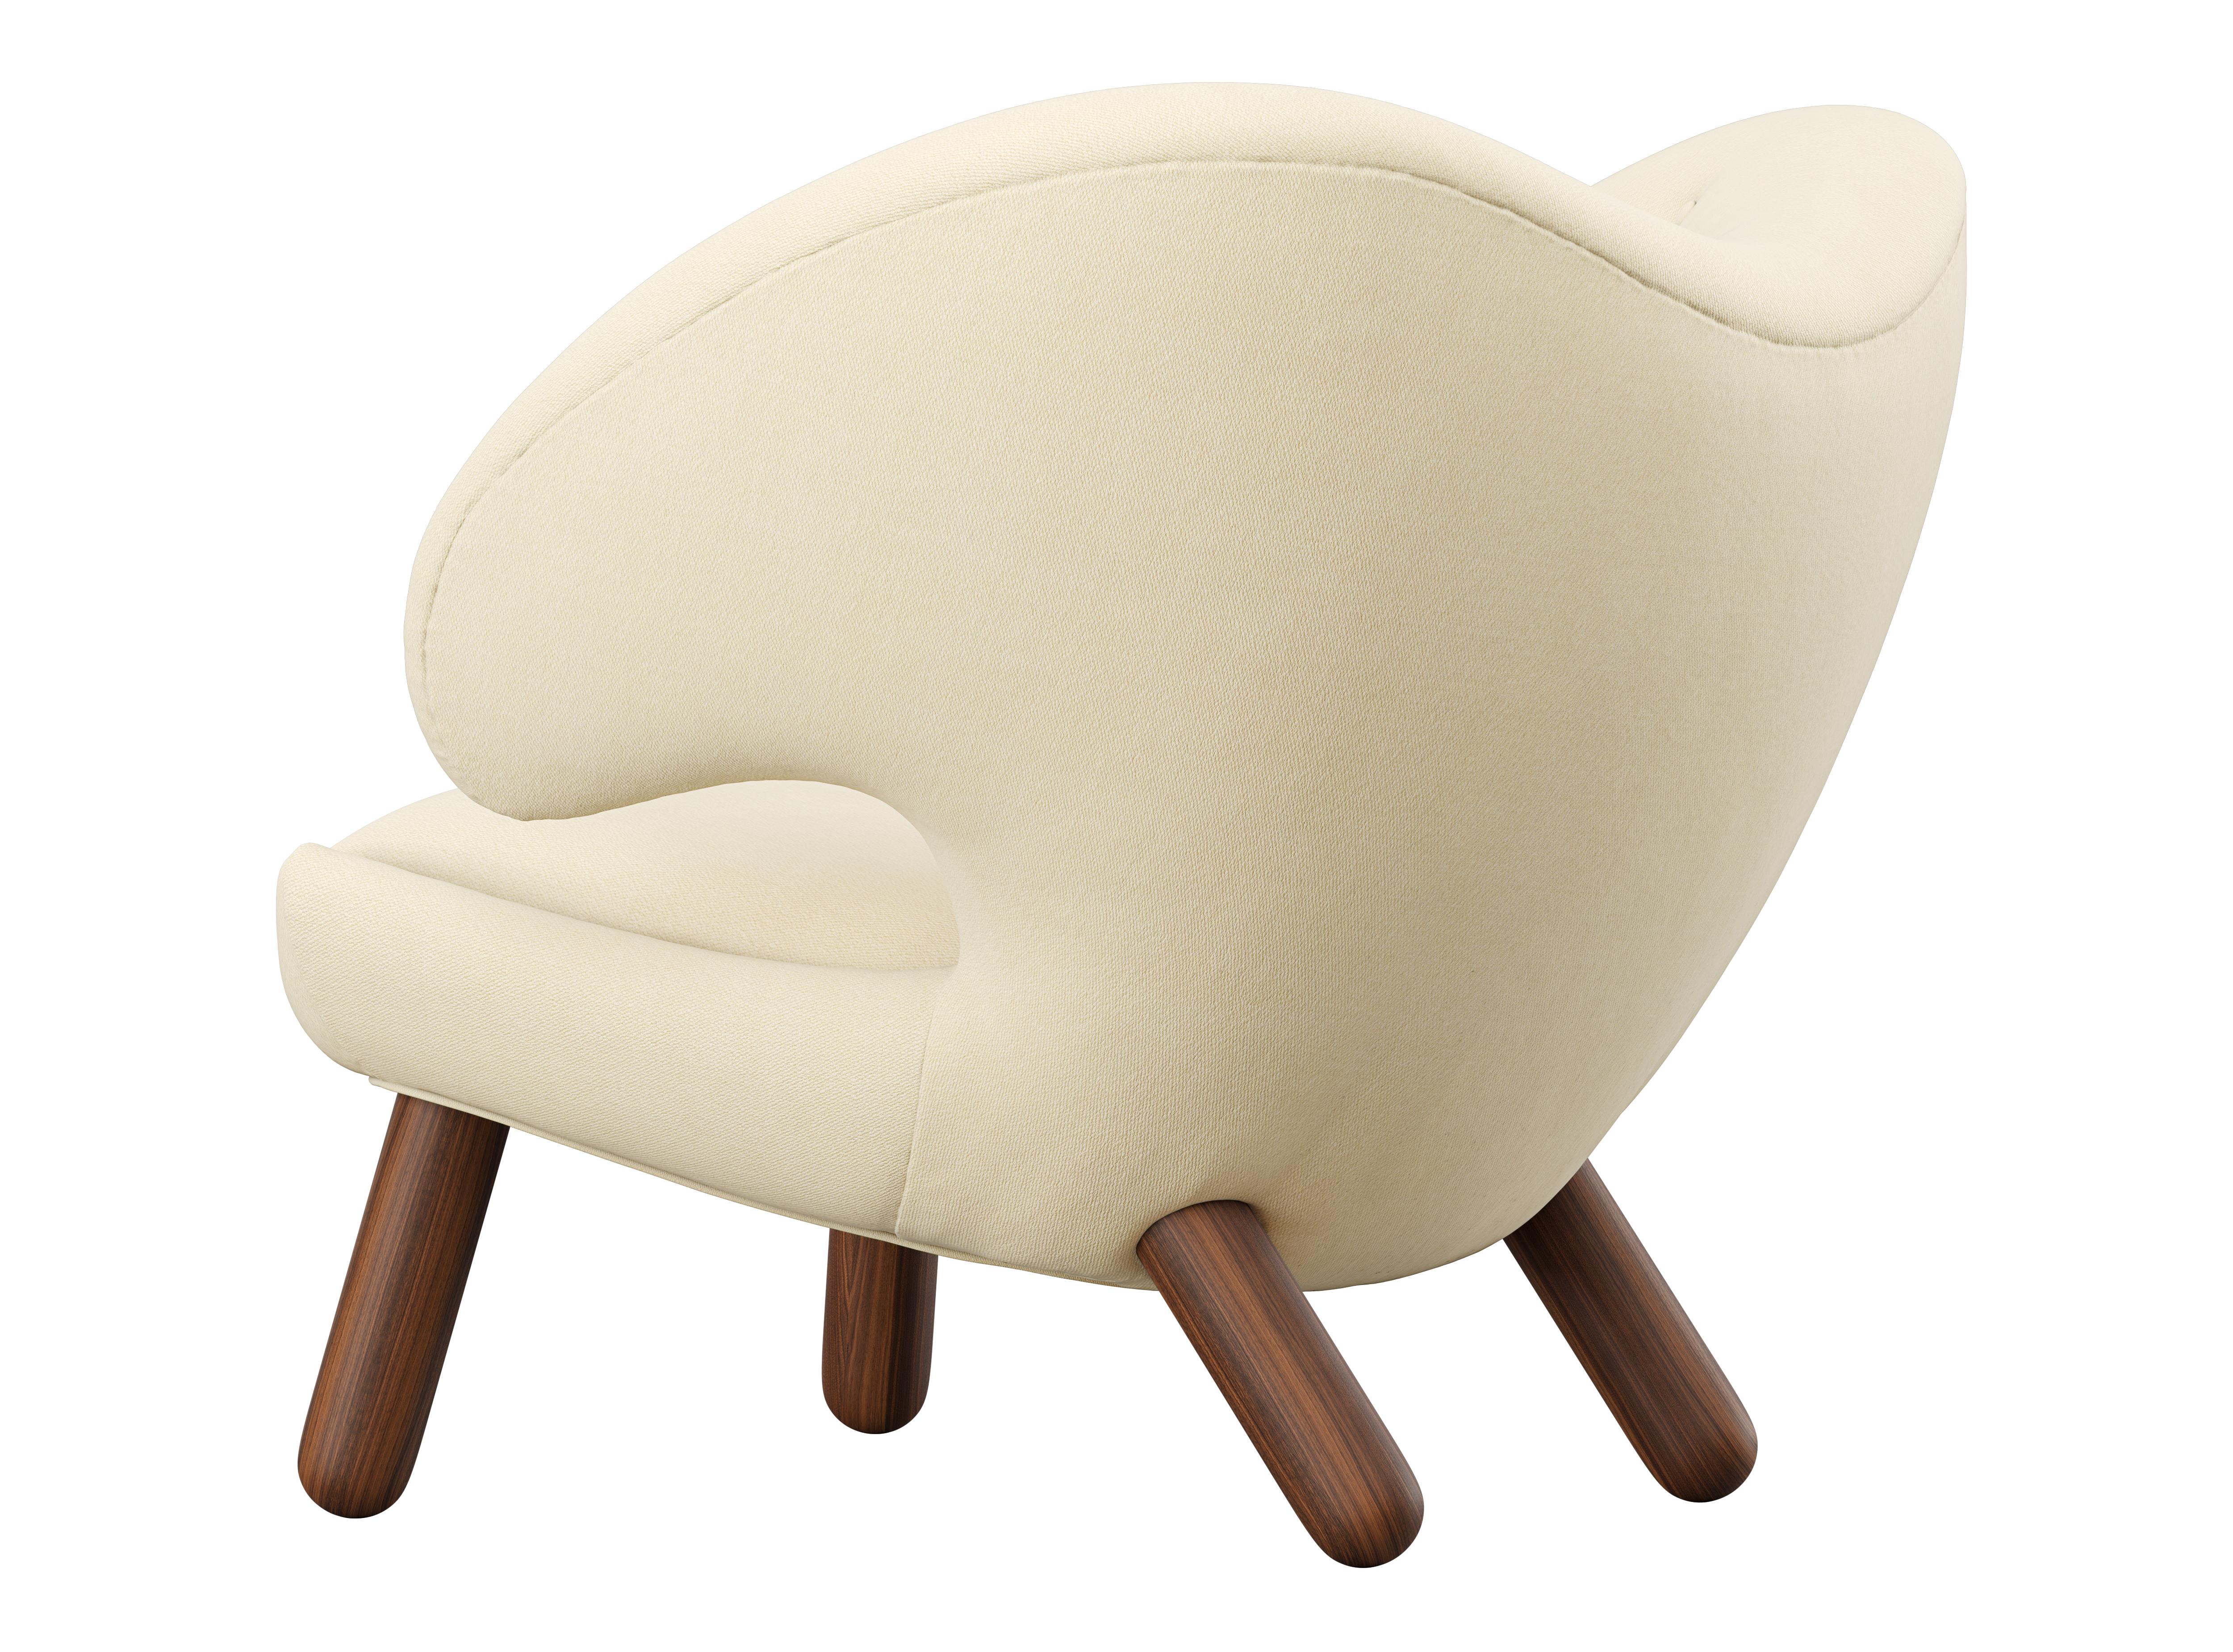 Modern Set of Two Finn Juhl Pelican Chair Upholstered in Wood and Fabric